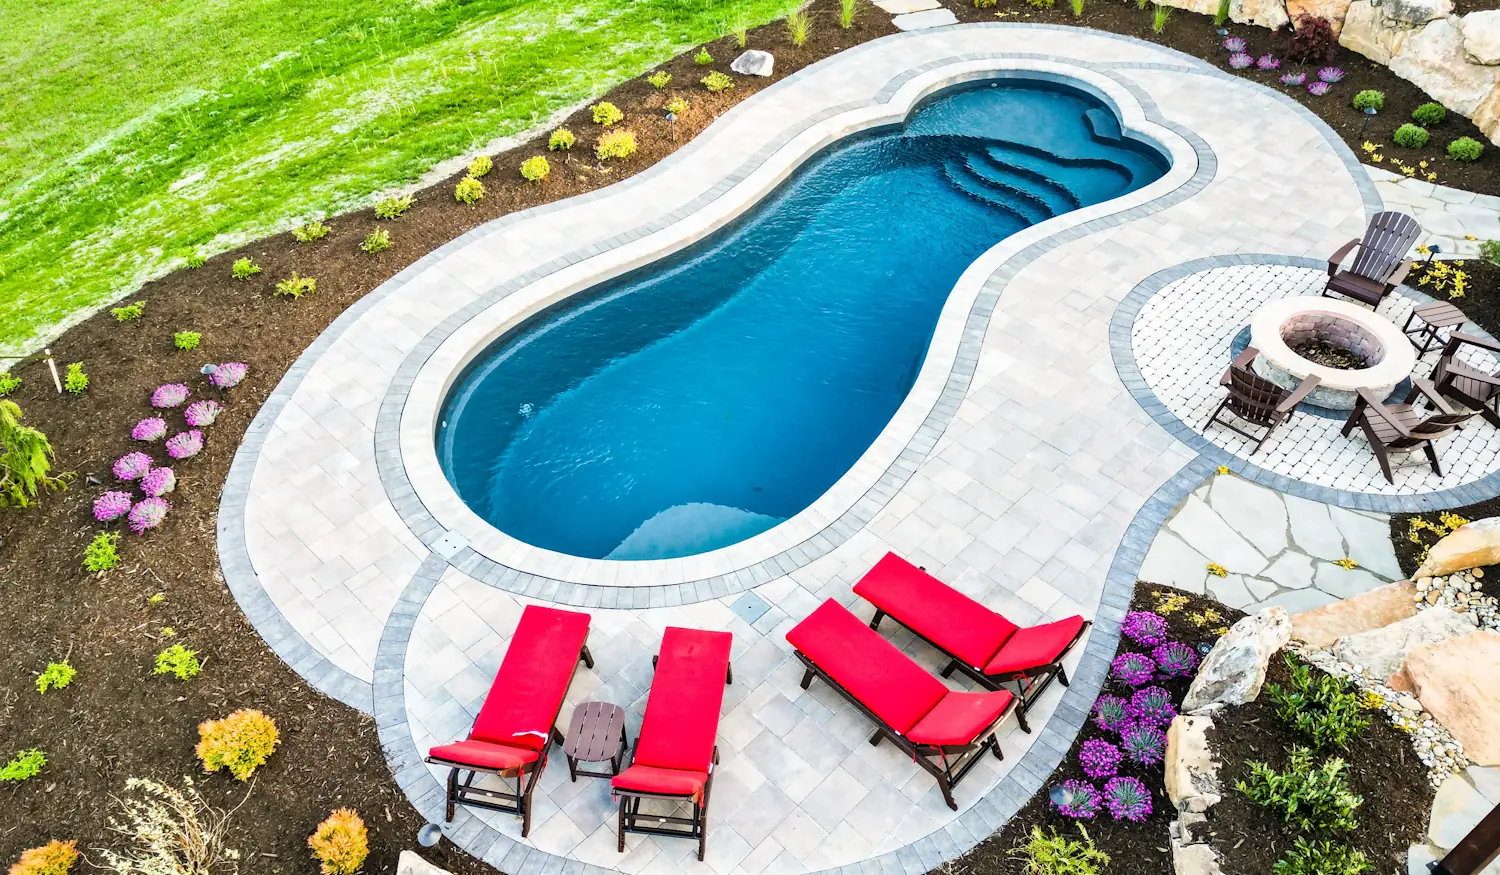 Discover how to utilize your heated fiberglass swimming pool from Leisure Pools at winter Plunge into Year-Round Fun: How Fiberglass Pools Turn Every Season into Splash-tastic Adventures.